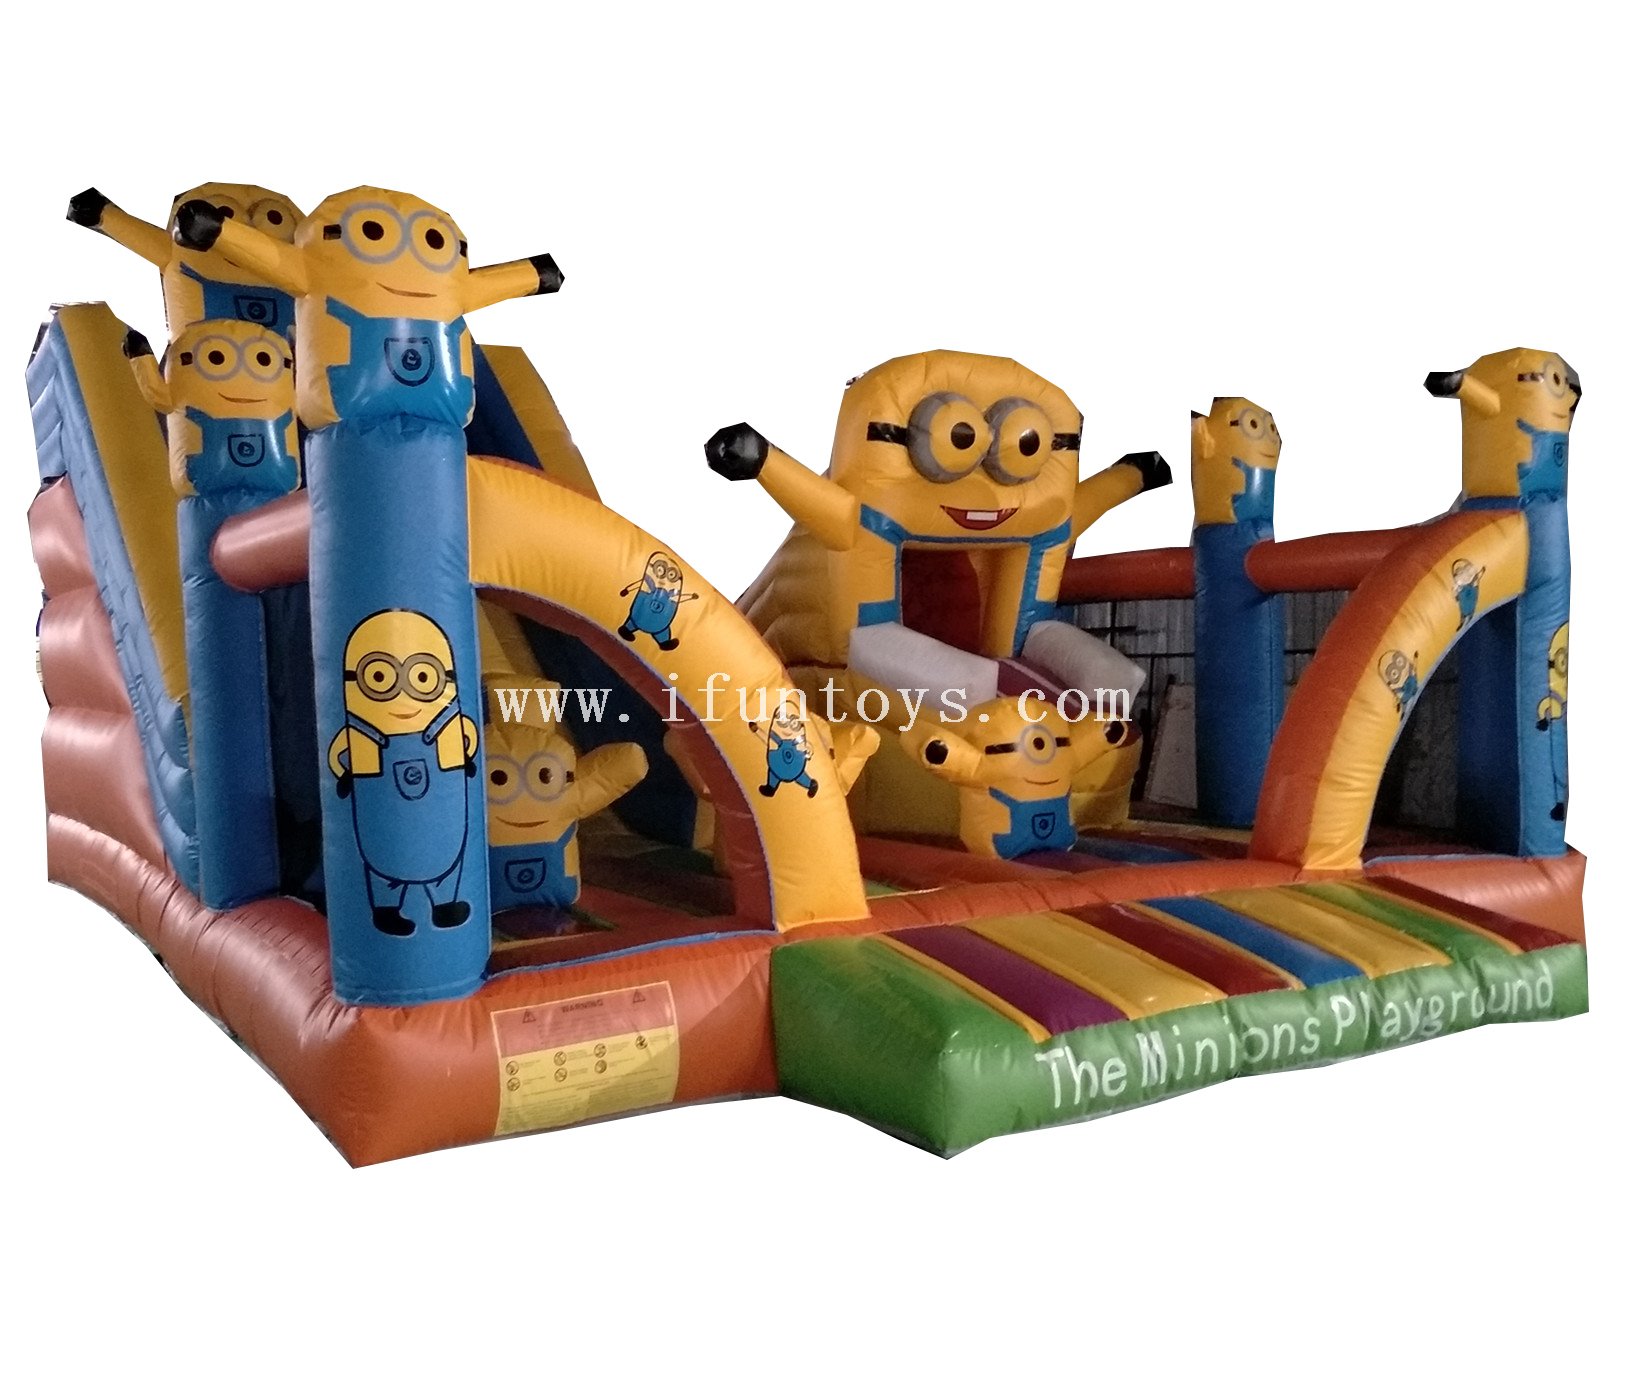  kids soft inflatable playground /Inflatable minions children play fun city park / minion inflatable bounce house with slide